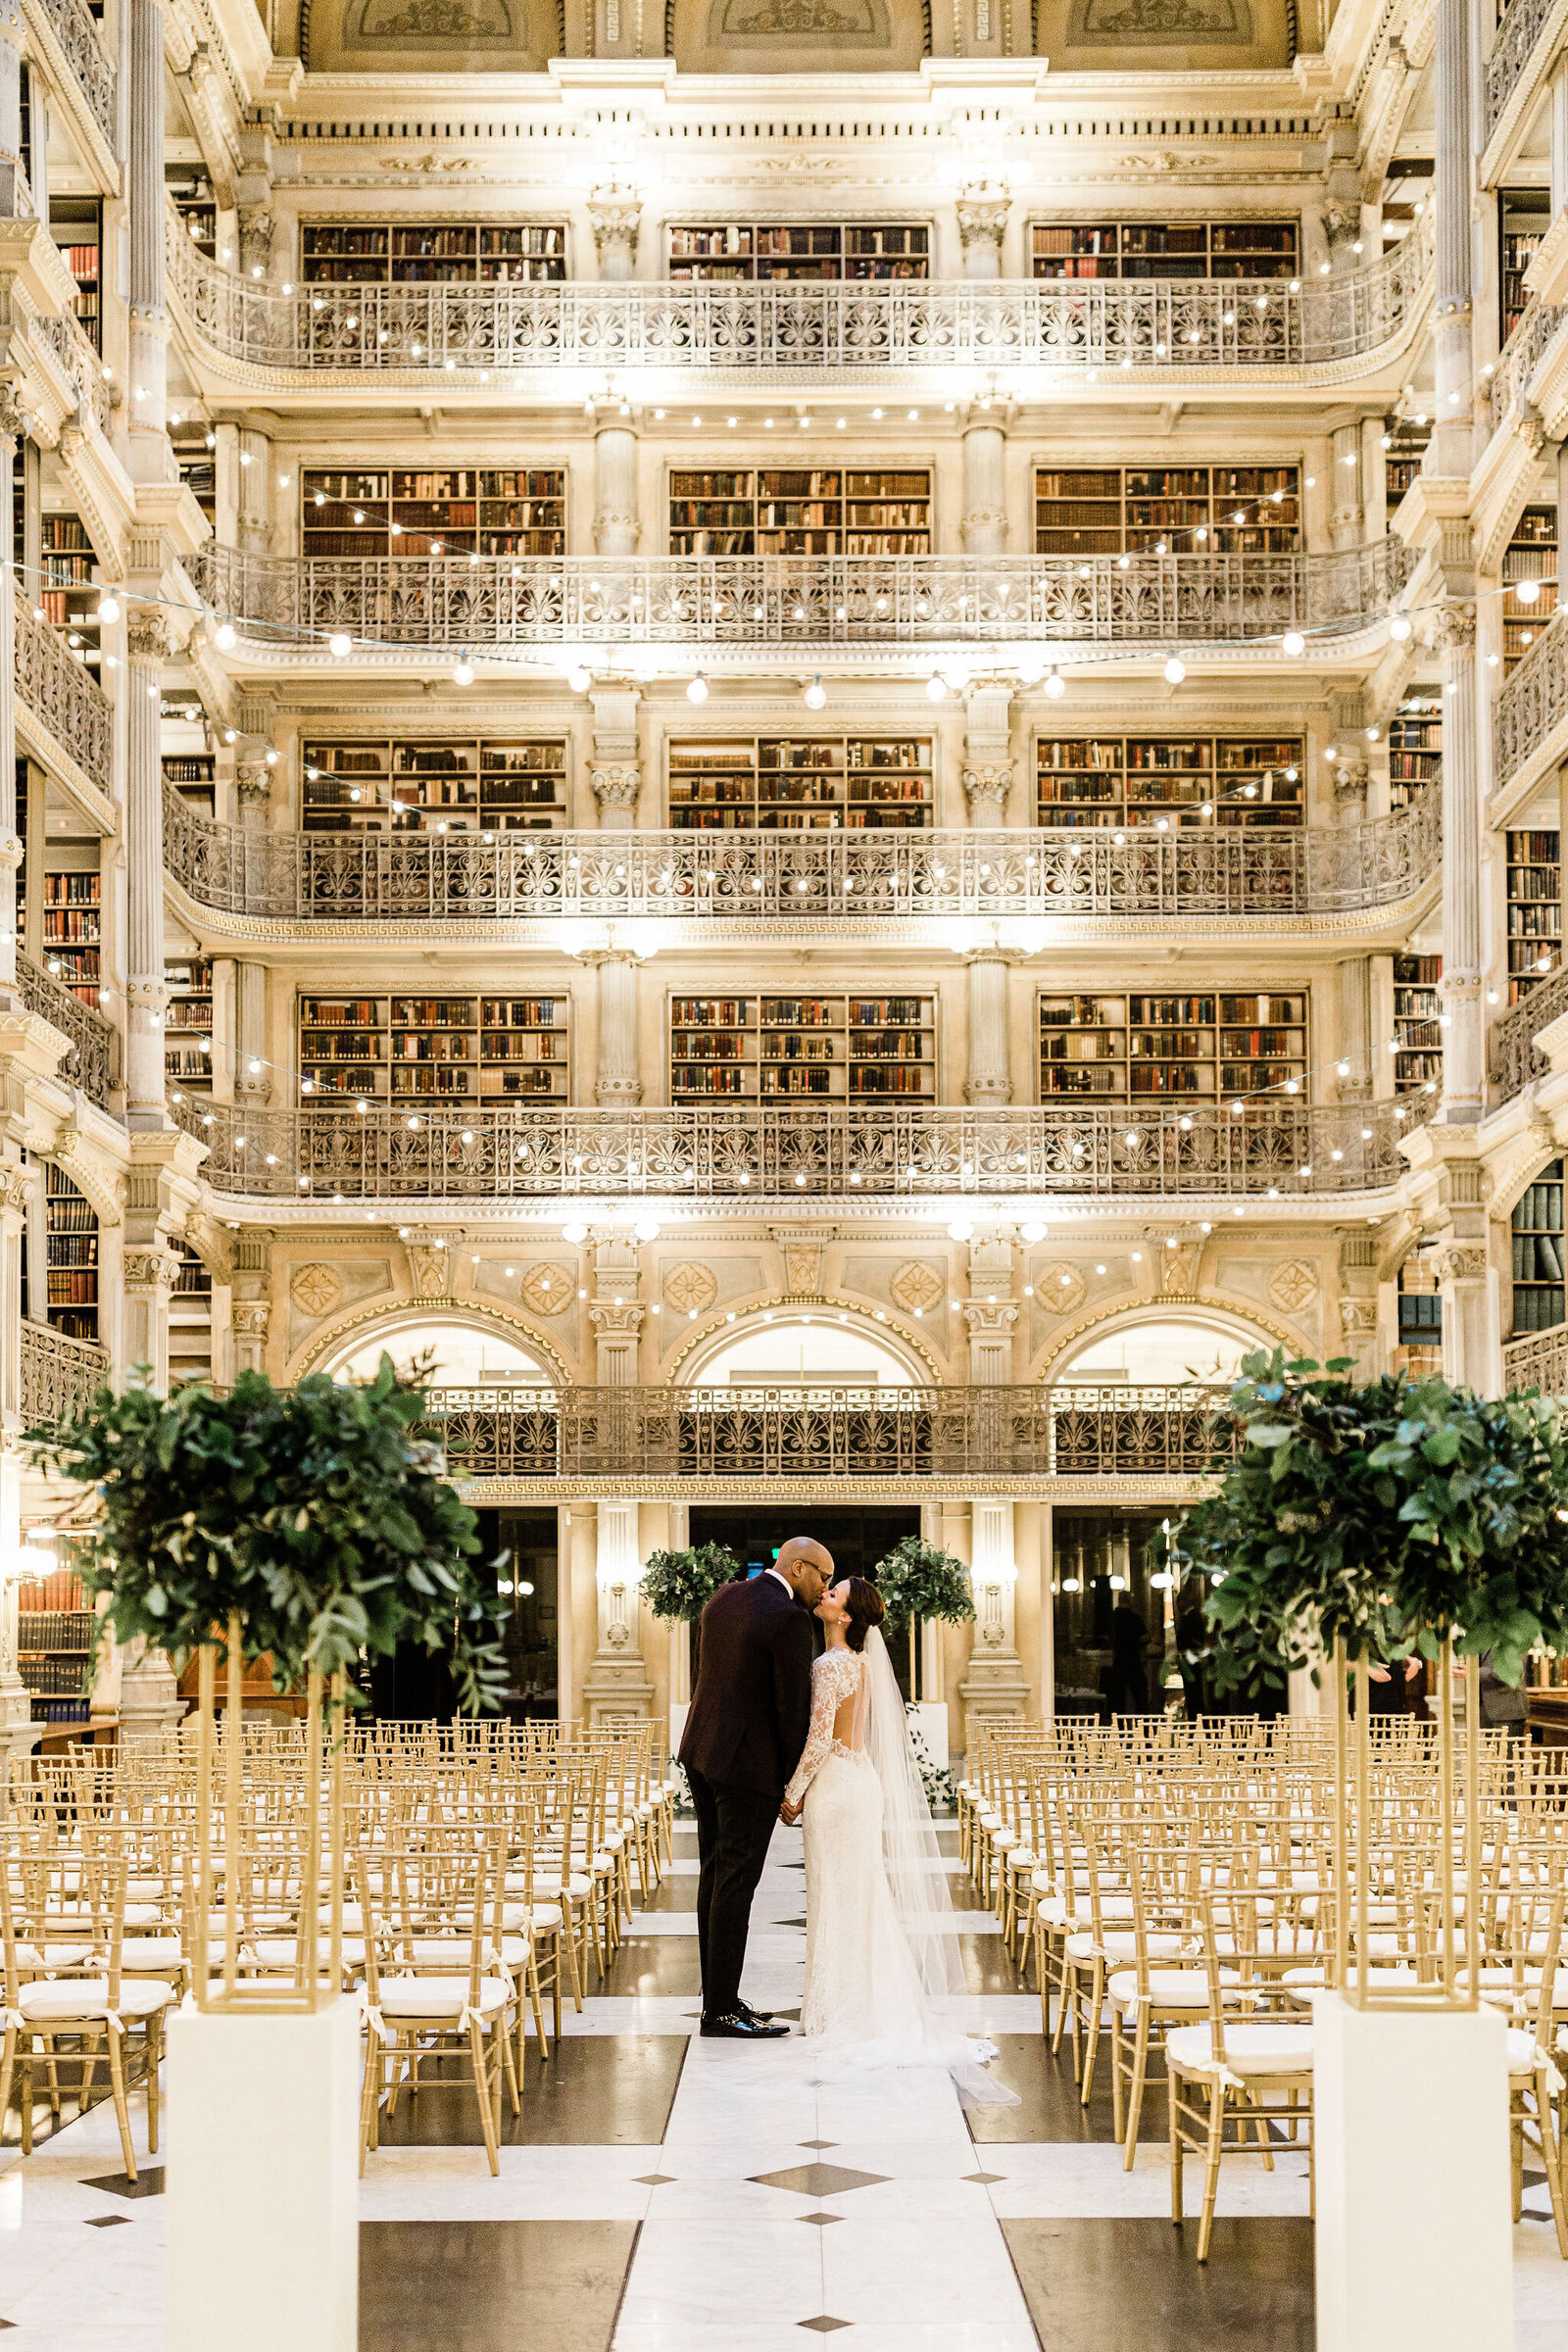 Timeless Wedding Day Couples Photo | The Peabody Library Baltimore MD | The Axtells Photo and Film